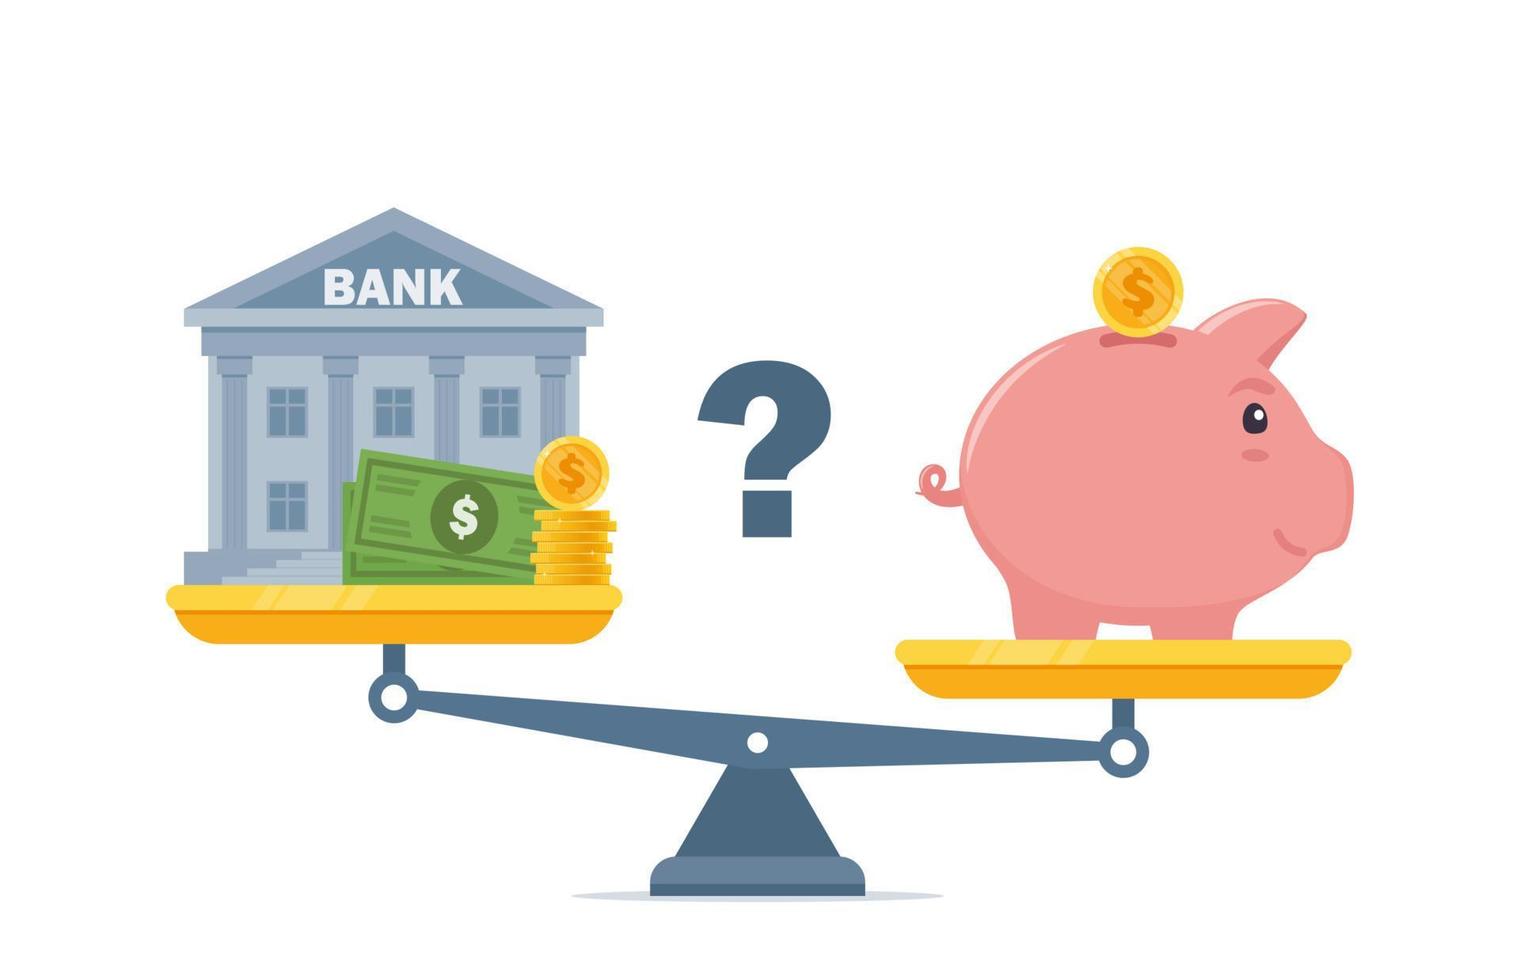 Bank and piggybank on scales, Choosing between them. Budget planning concept. Money savings investment and funding. Bank loan and economy choice. Financial literacy. Vector illustration.